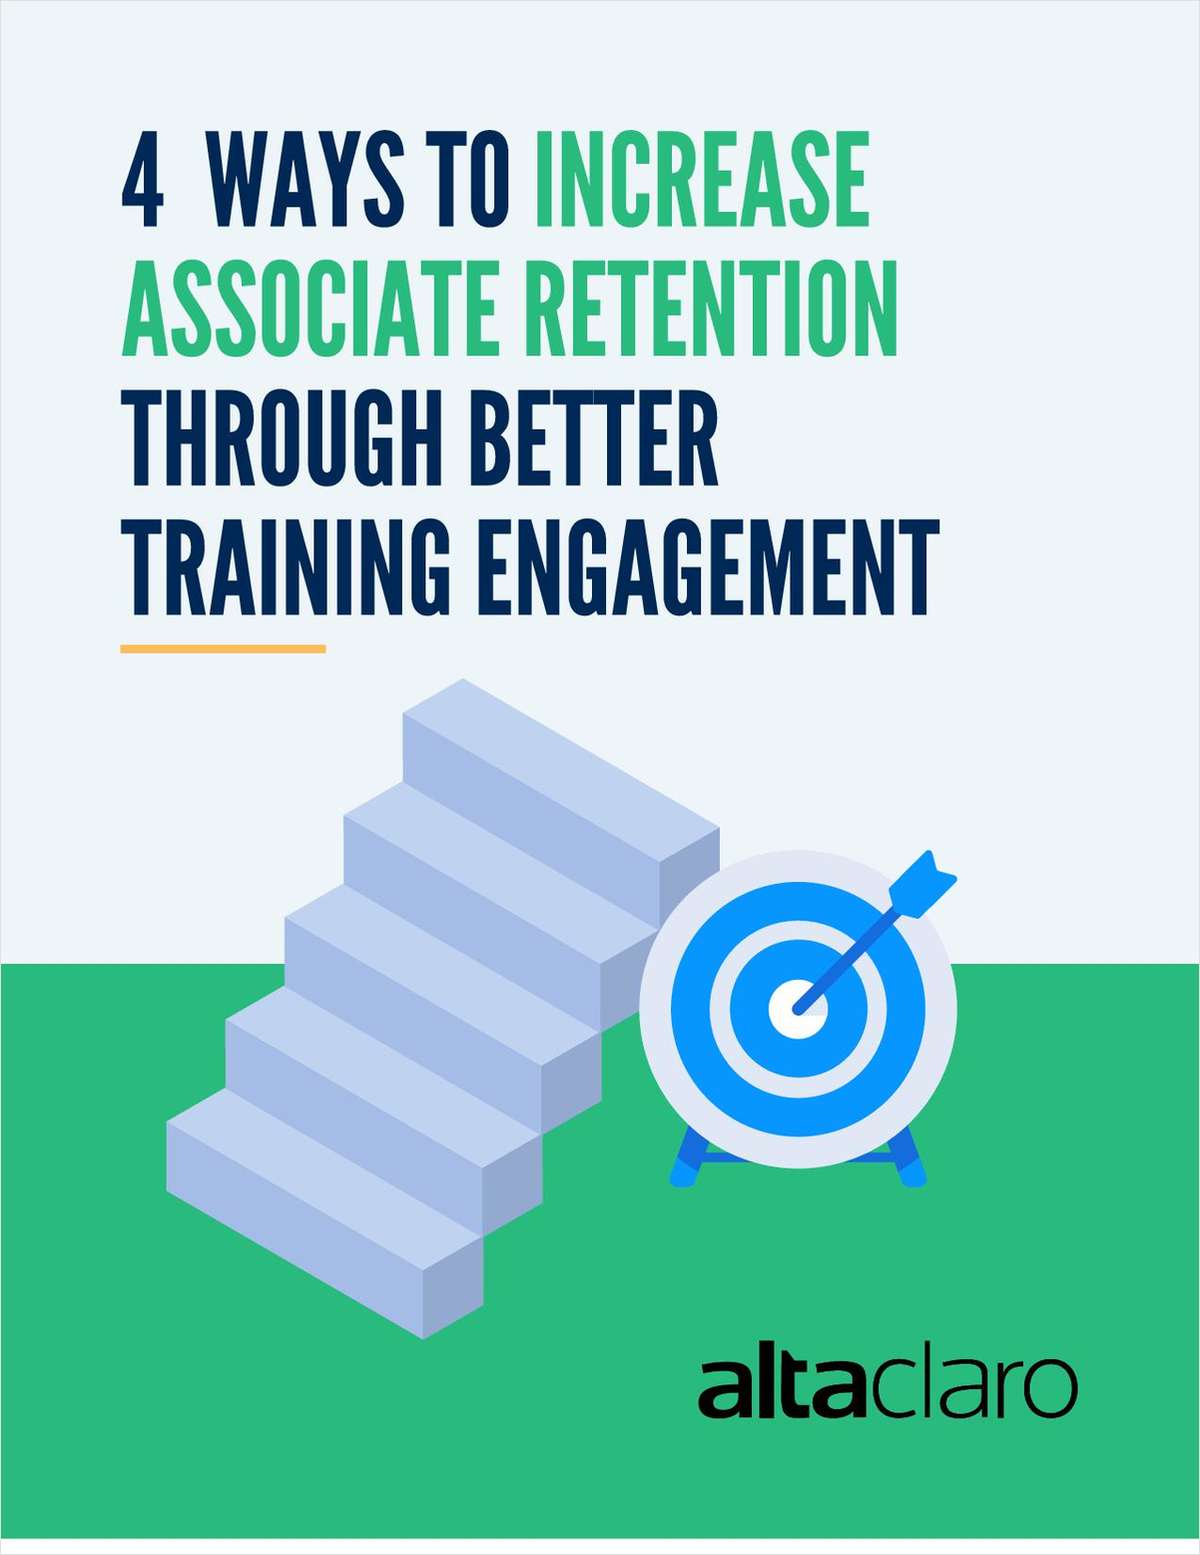 Turnover at the top 400 law firms costs about $9.1 billion every year.  Retaining associates is crucial for law firms to remain competitive in this challenging environment. But how do firms accomplish this? Download this guide and learn four ways for your firm to increase associate retention through better training engagement.